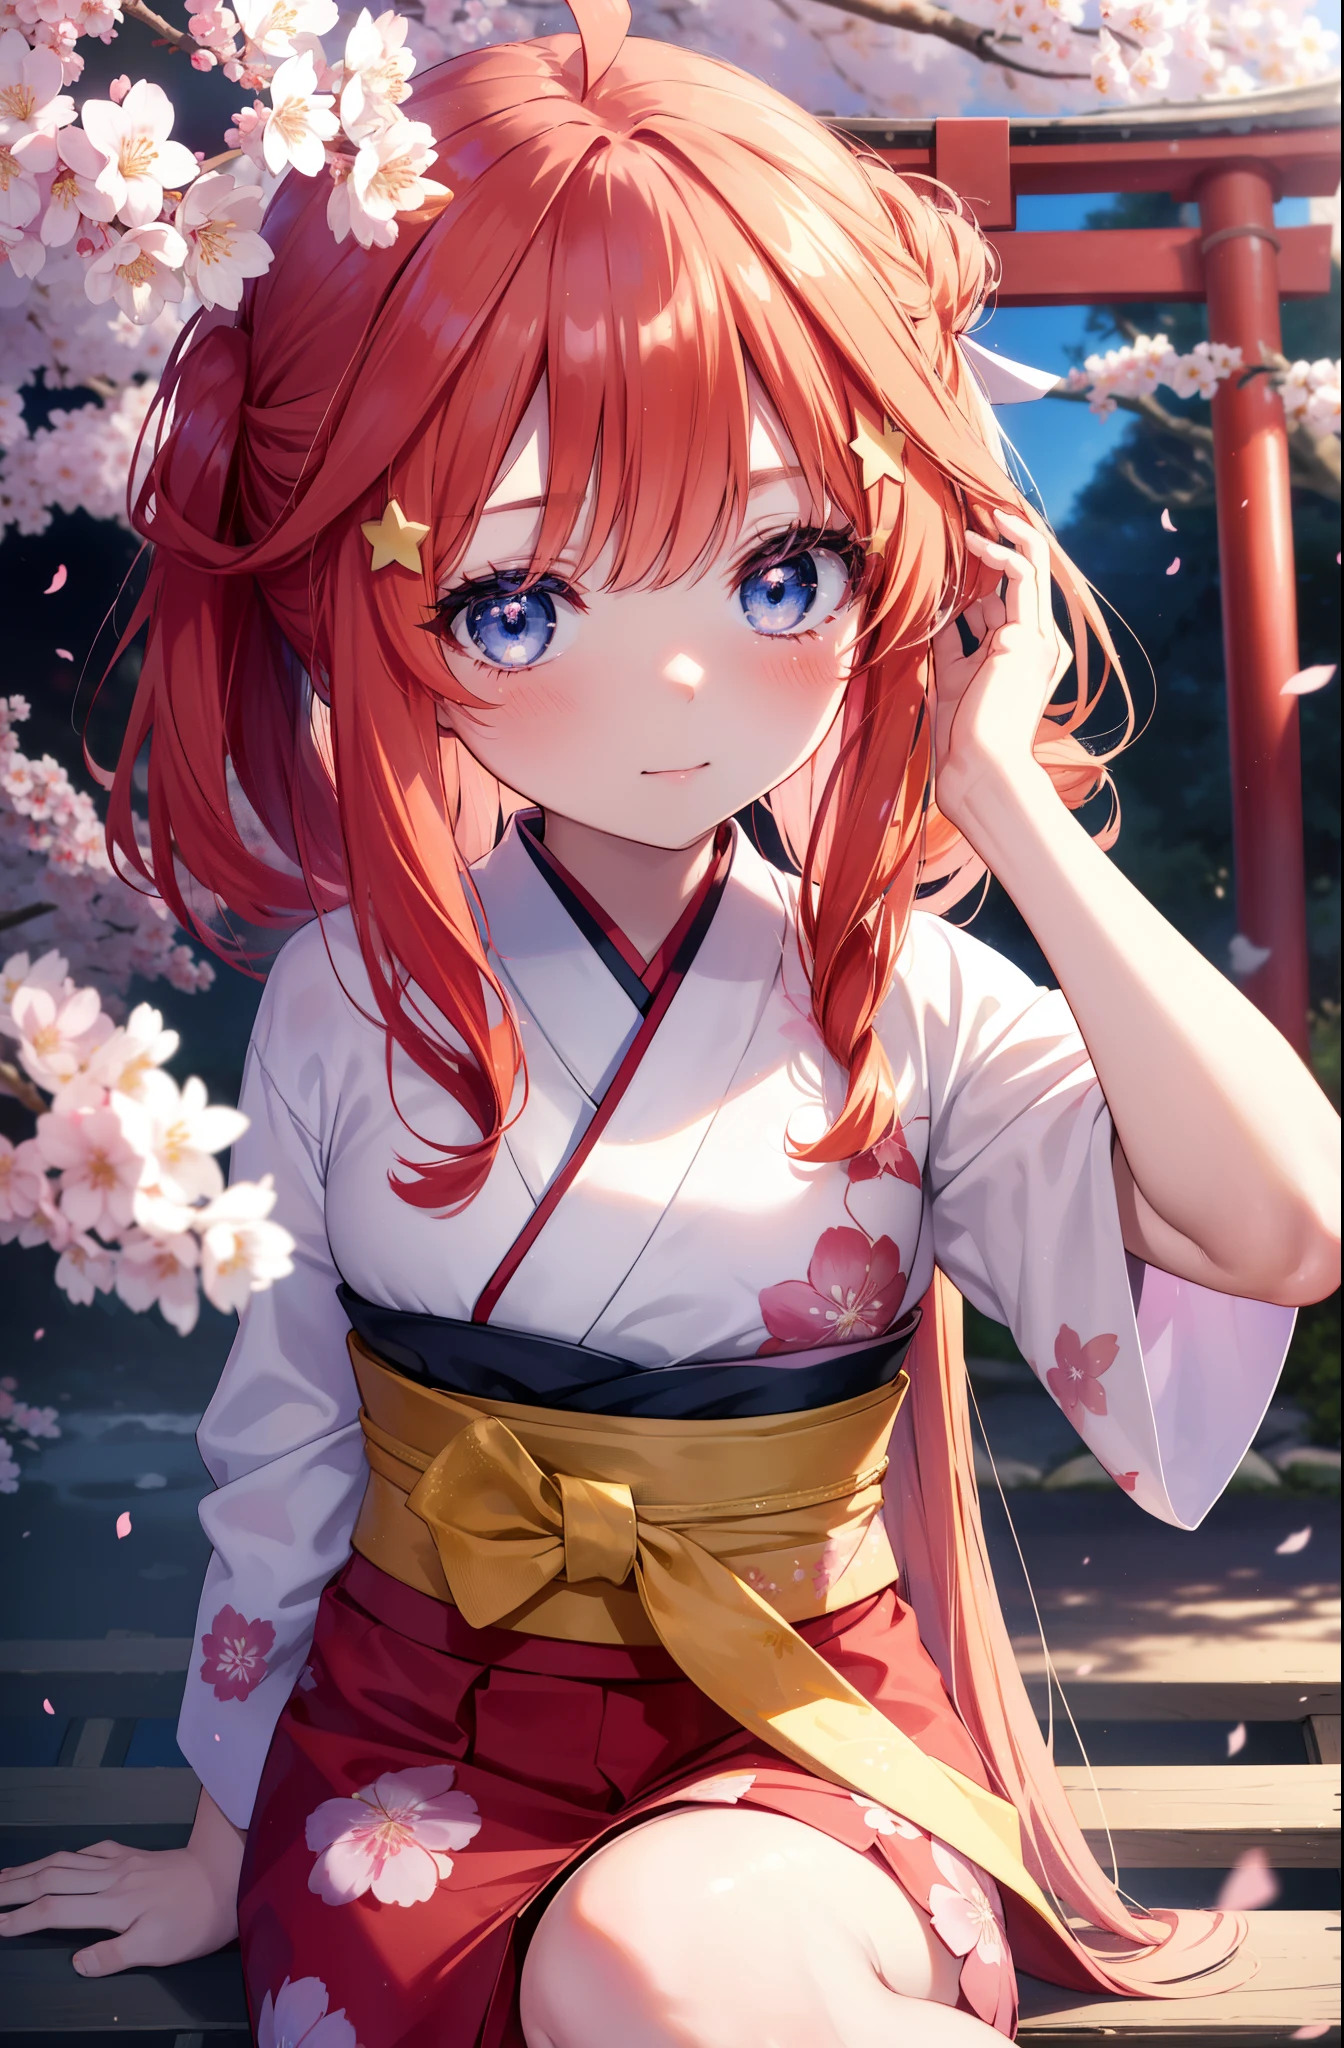 itsukinakano, Itsuki Nakano, bangs, blue eyes, hair between eyes, Ahoge,hair tied back,,long hair, redhead, star \(symbol\), hair ornaments, star hair ornaments,smile,blush,Gorgeous kimono with red floral pattern,white foot bag,Zori cherry blossoms are blooming,Cherry blossoms are scattered,Cherry blossom tree-lined path,Put your hands together and put them on your stomach,
break outdoors, shrine,torii,
break (masterpiece:1.2), highest quality, High resolution, unity 8k wallpaper, (figure:0.8), (detailed and beautiful eyes:1.6), highly detailed face, perfect lighting, Very detailed CG, (perfect hands, perfect anatomy),